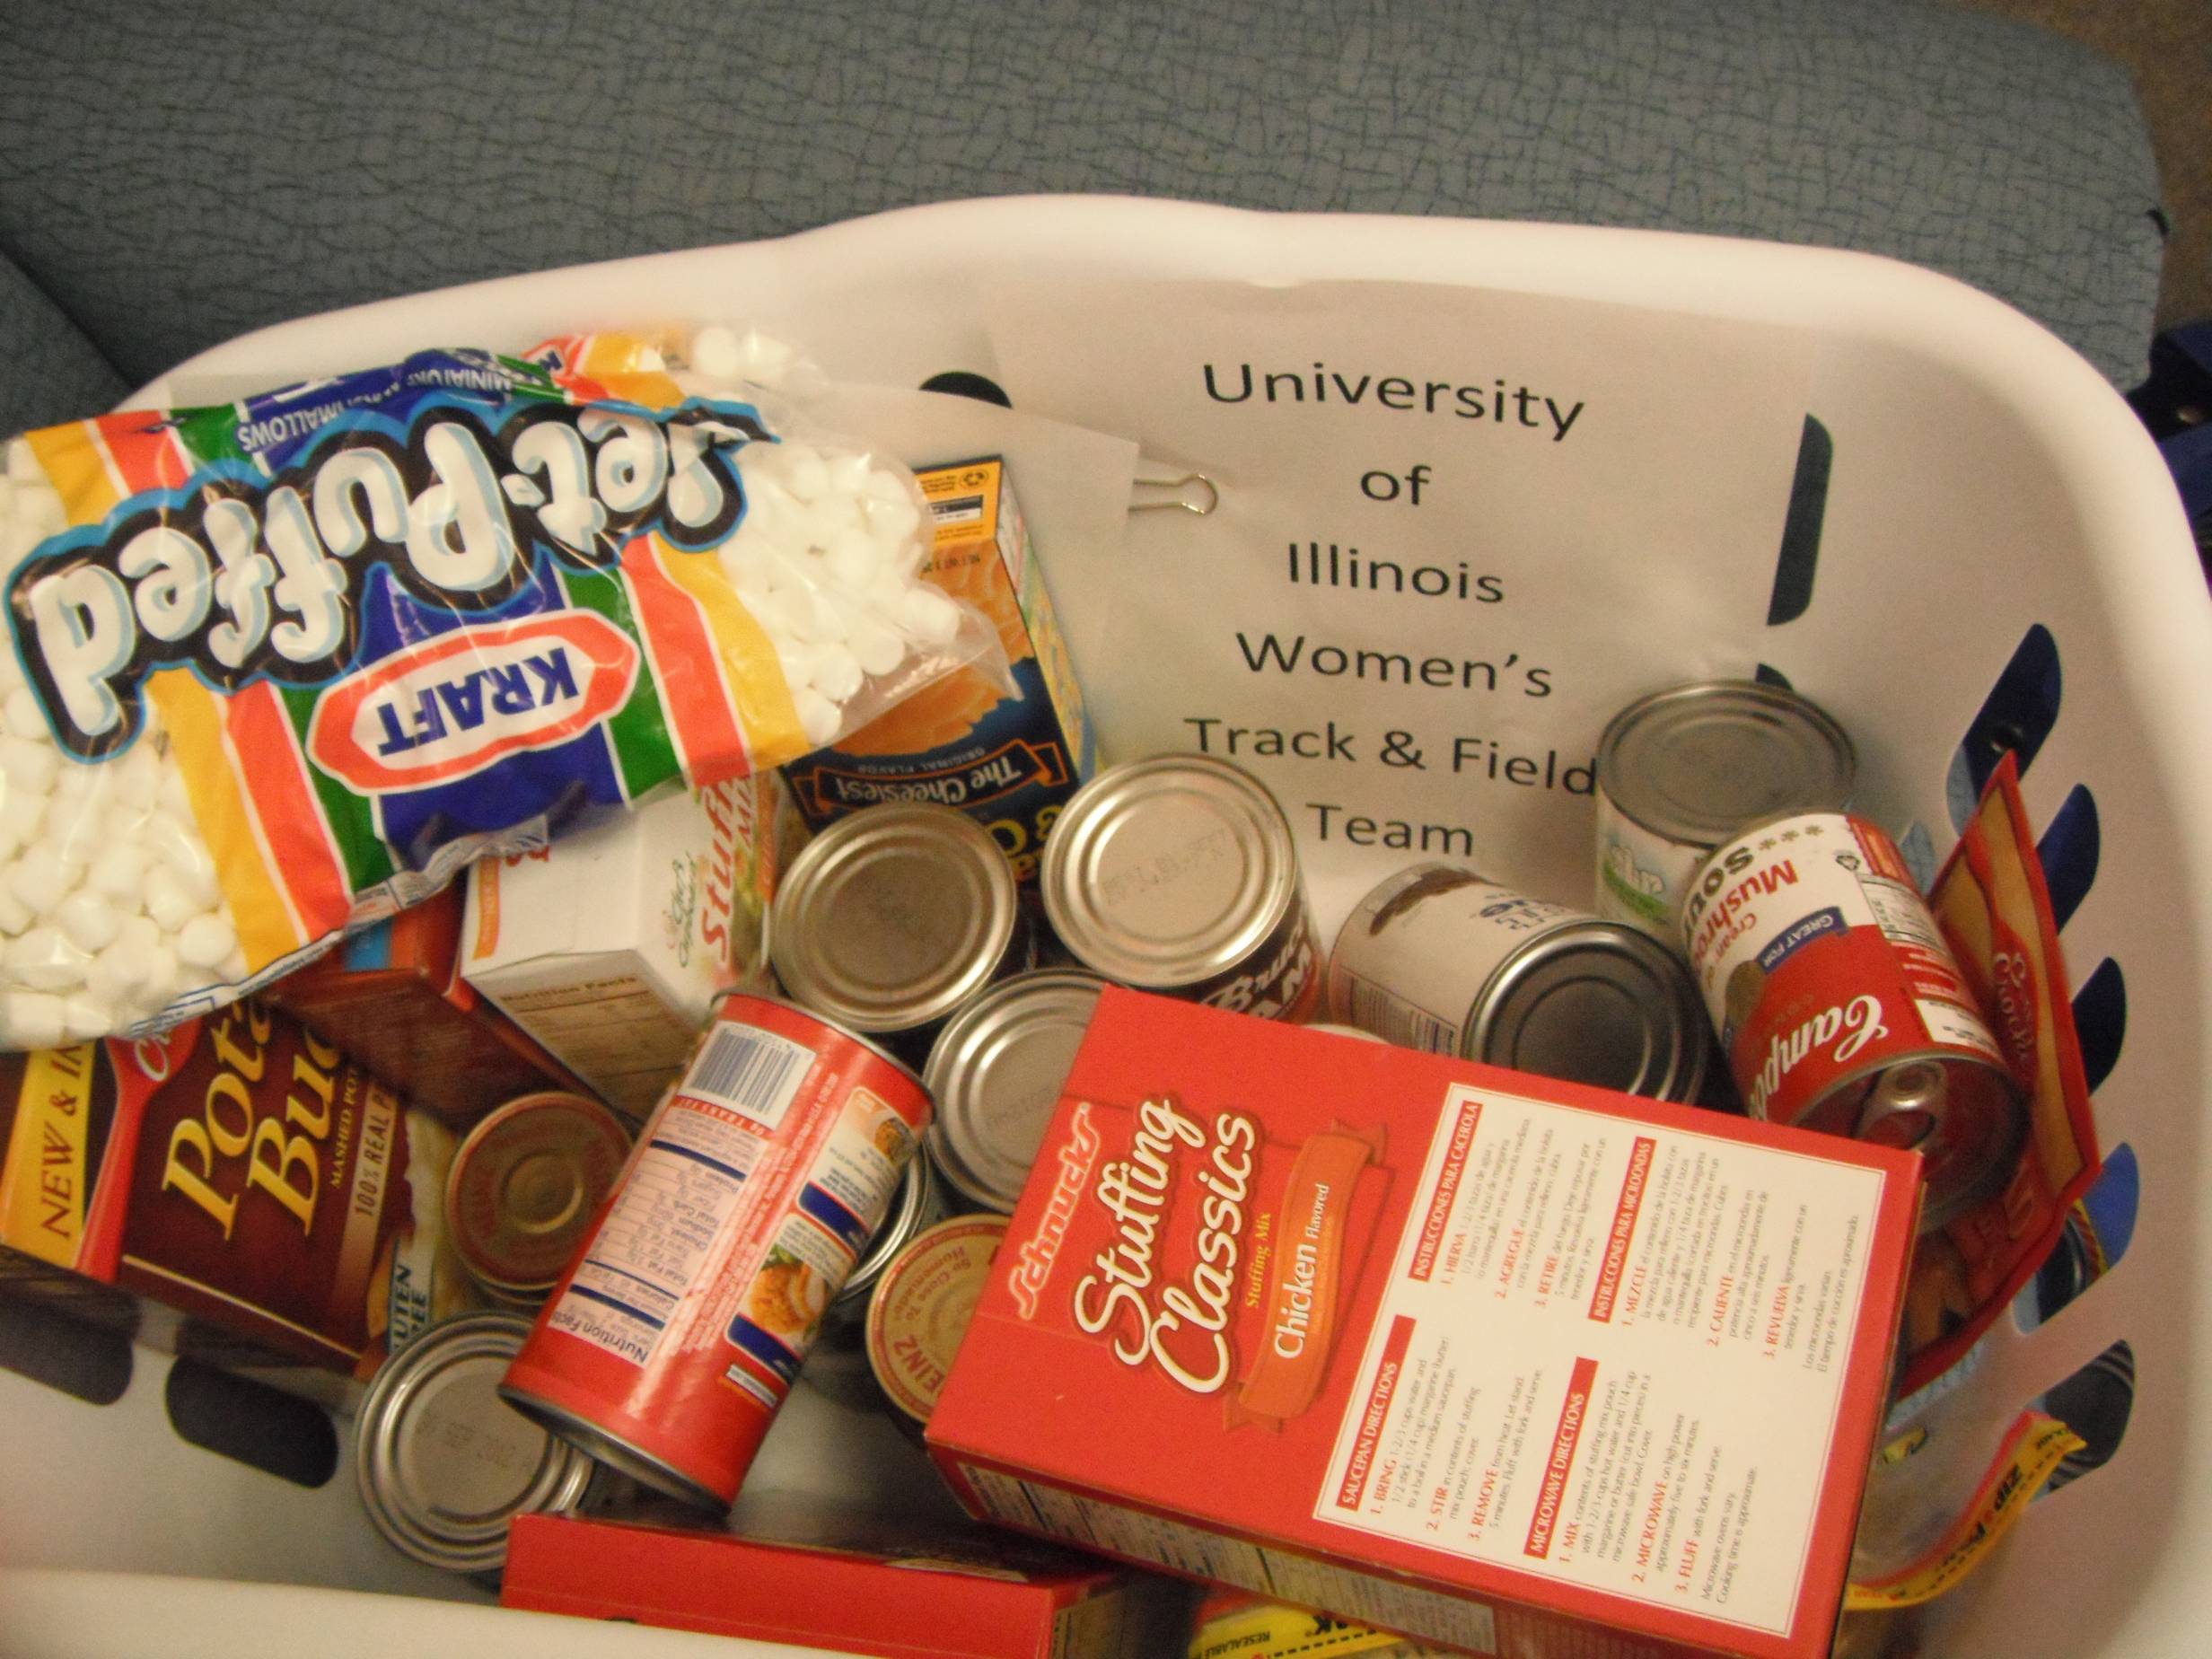 Students donate during the holidays through the Office of Volunteer Programs